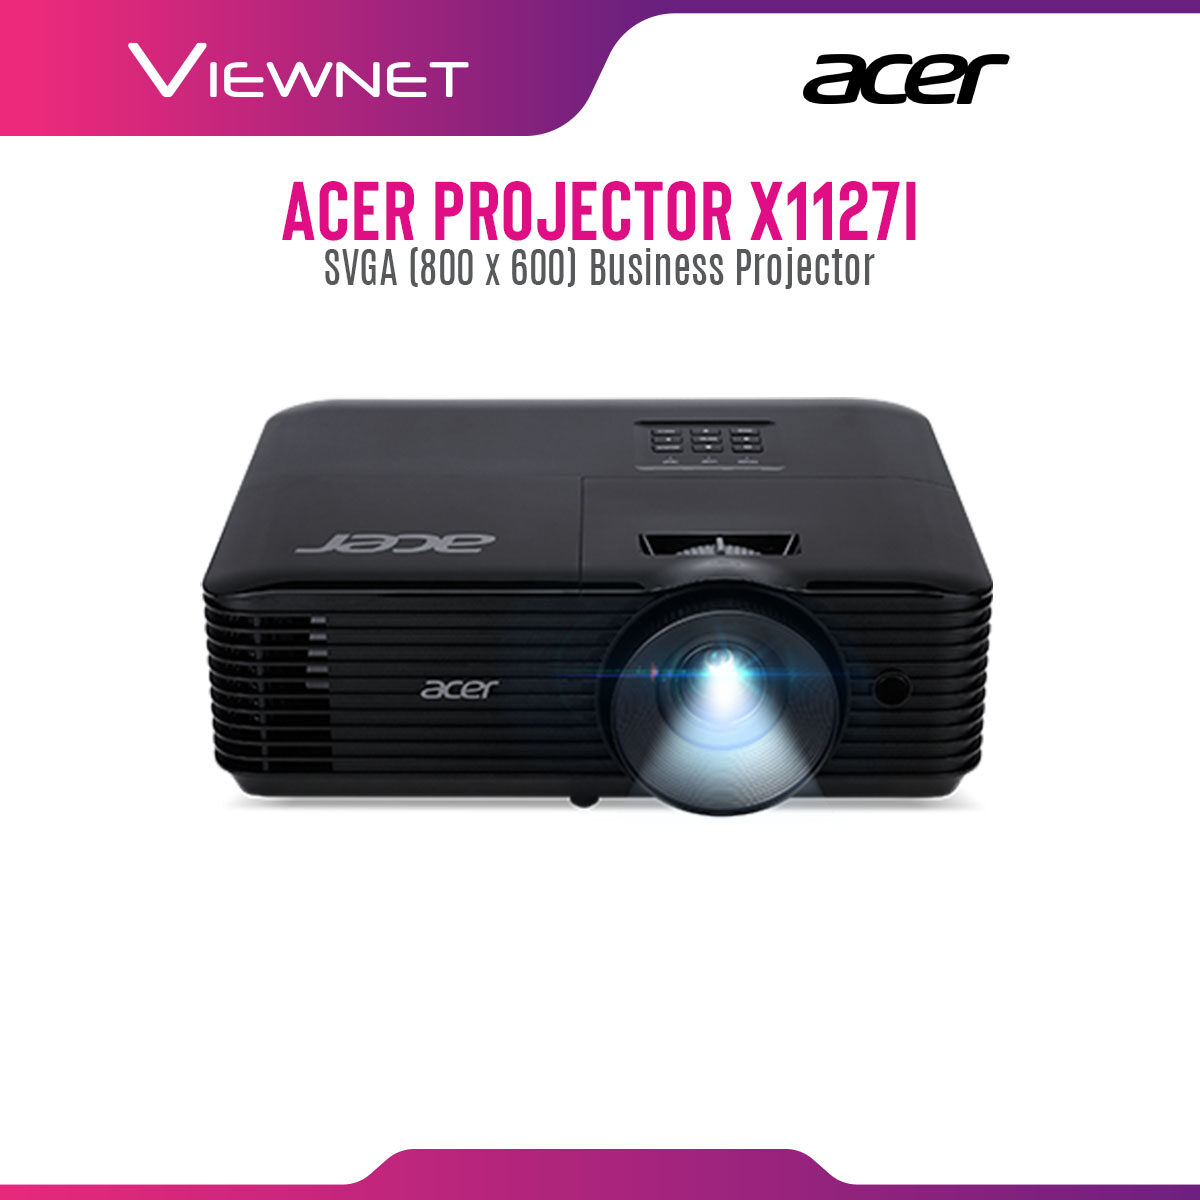 Acer Projector X1128i with SVGA Resolution, 4500 Lumens, Wireless Projection, HDMI and VGA Support